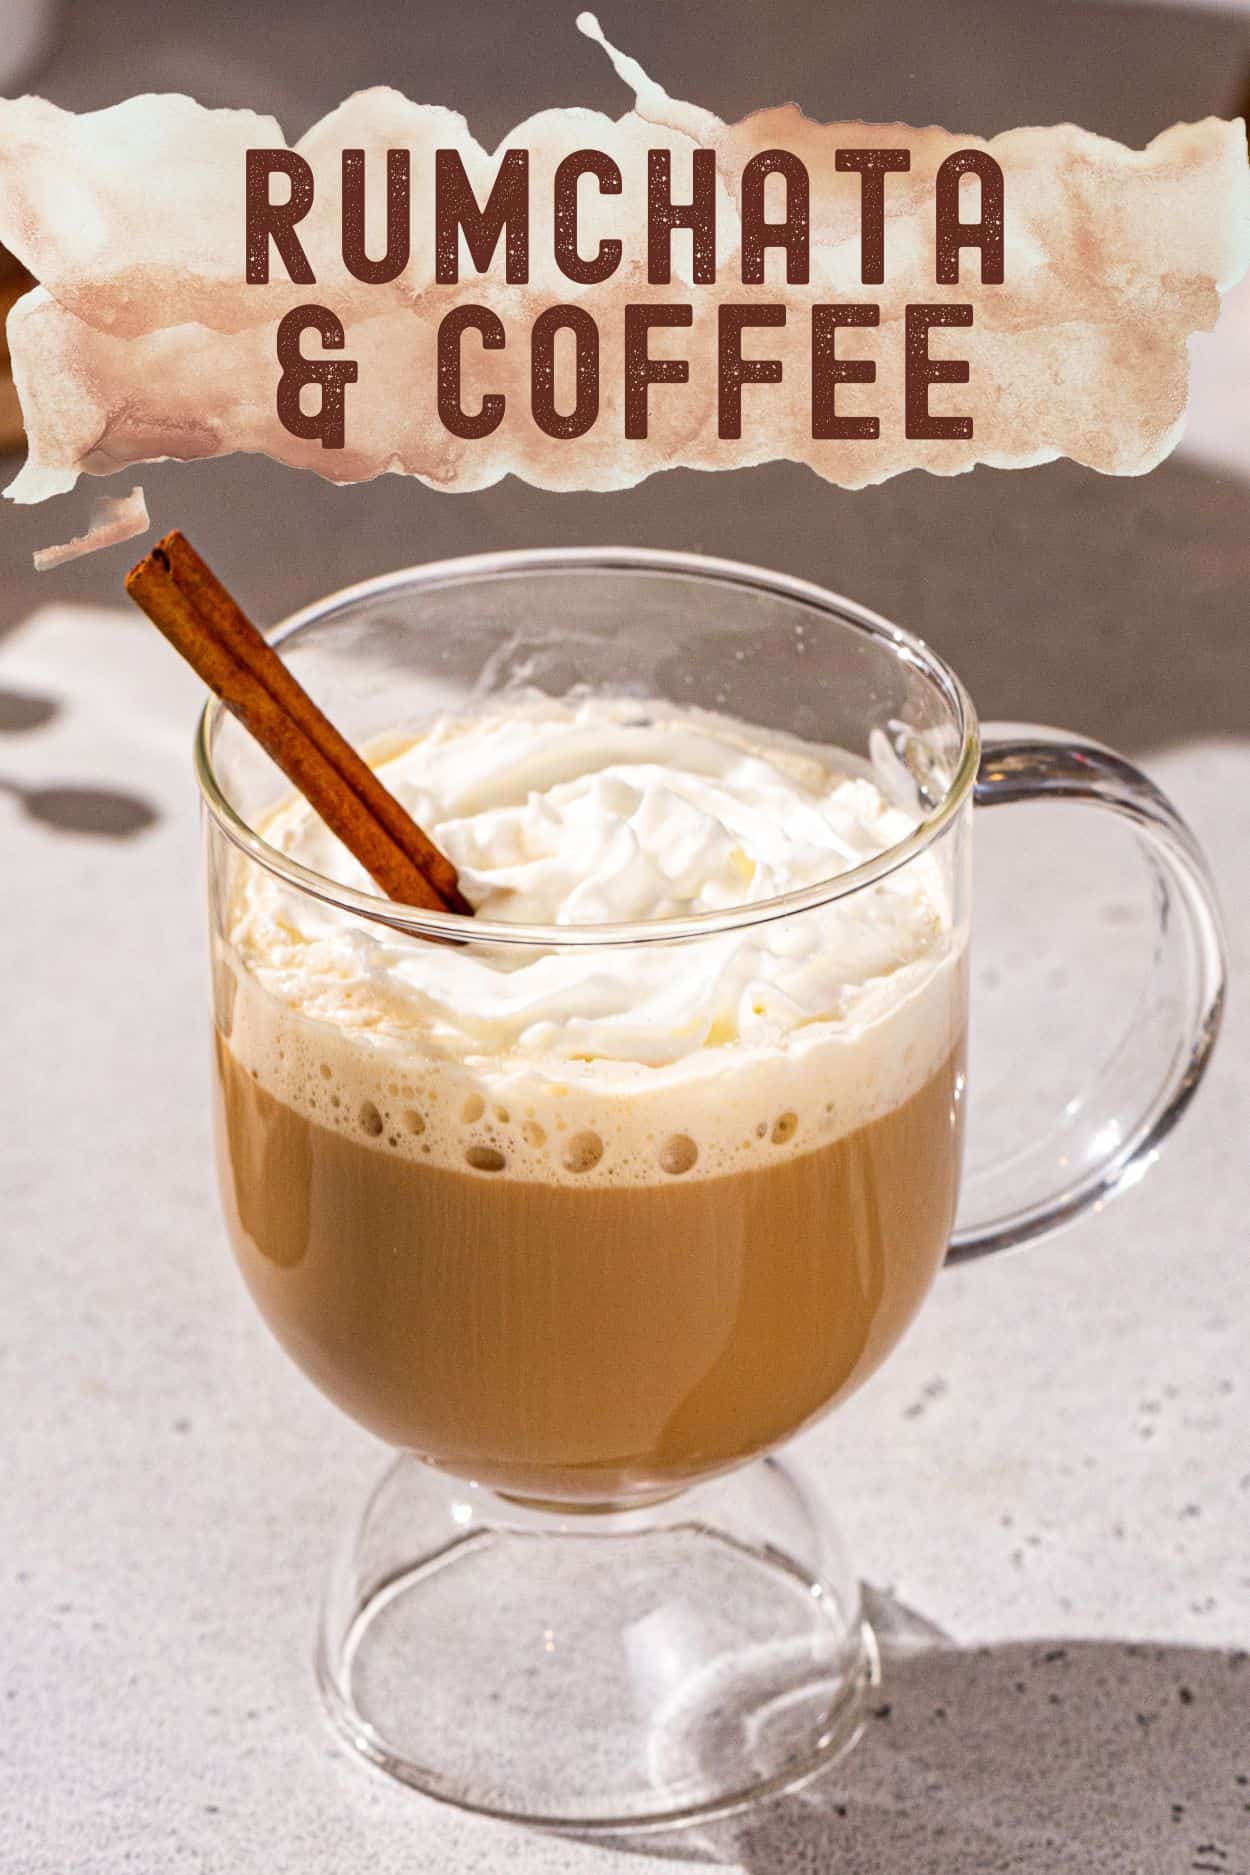 Text at the top says "Rumchata & Coffee", and below the text is an image of the Rumchata Coffee cocktail. The drink is in a glass mug with a handle and looks like a latte, with a layer of whipped cream on top and a cinnamon stick for garnish.